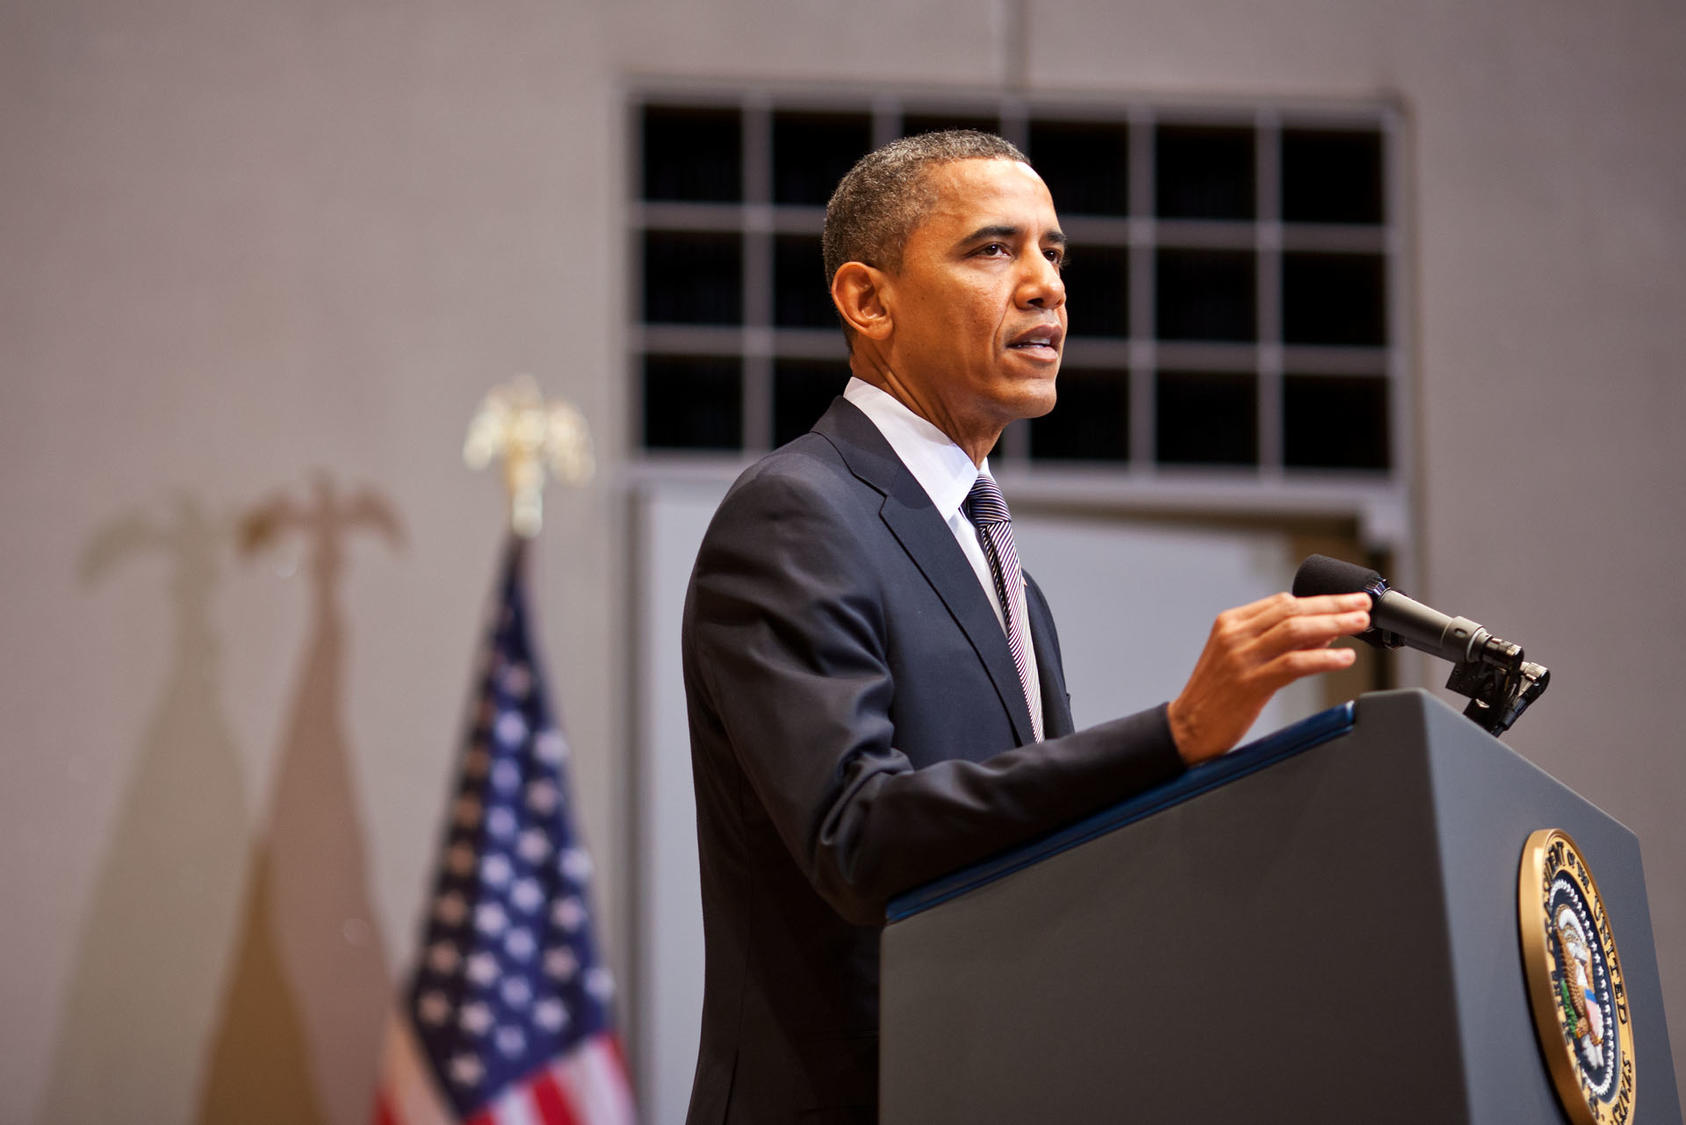 President Barack Obama delivers remarks at the U.S. Holocaust Memorial Museum in Washington, D.C.